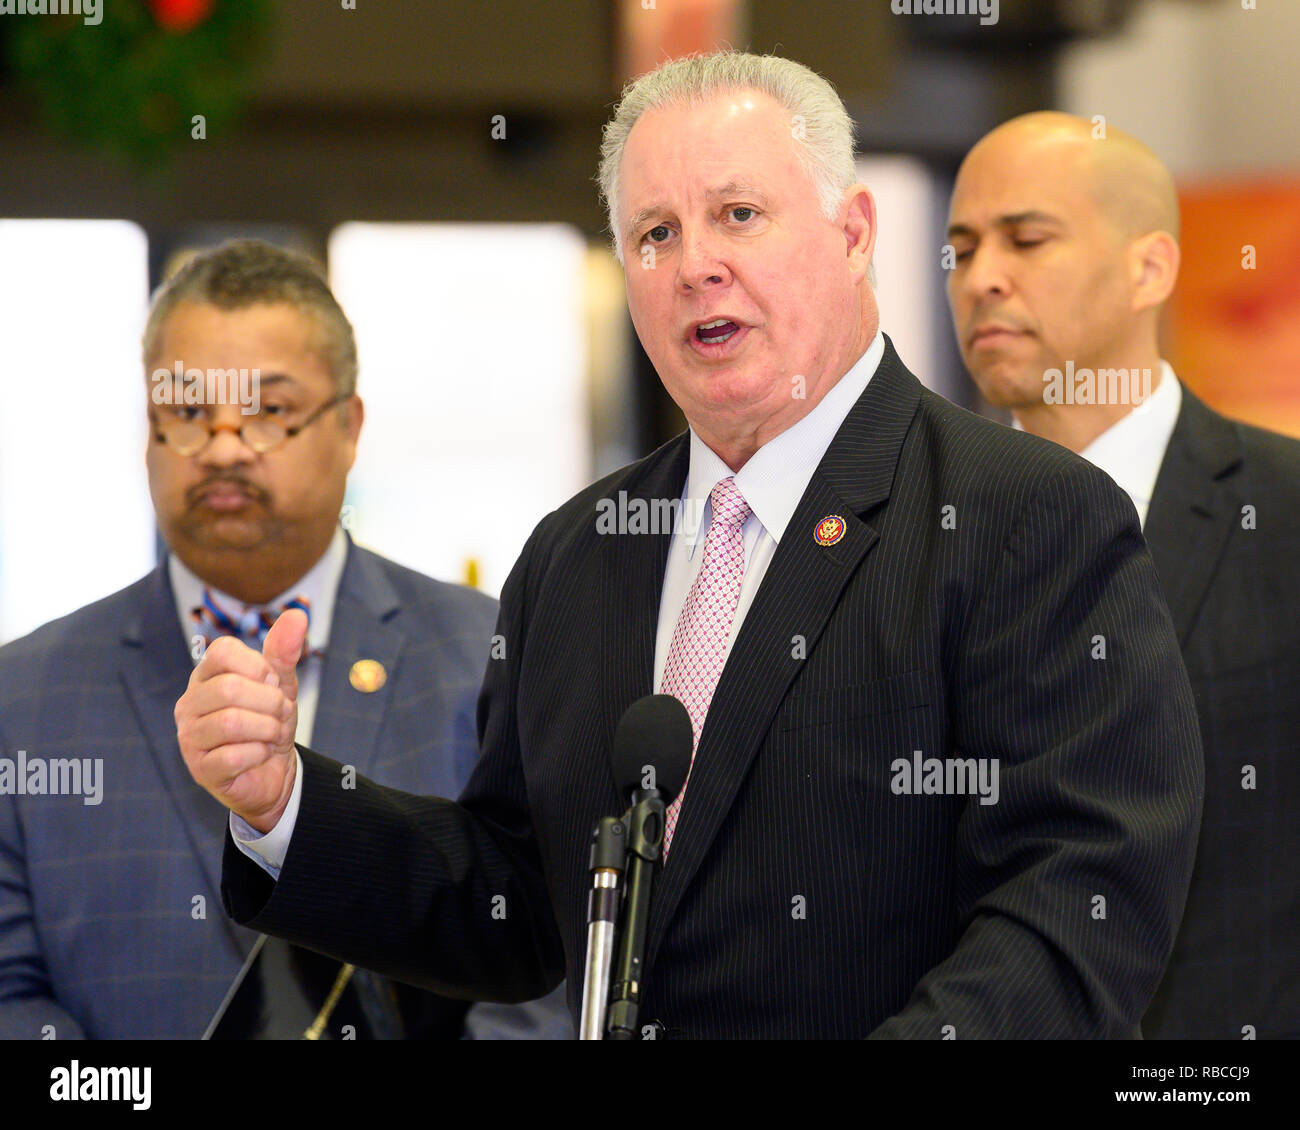 U.S. Representative Albio Sires (D-NJ) seen speaking at a news conference at Newark Liberty International Airport to demand an end to the partial government shutdown leaving thousands of federal workers in New Jersey without pay and to highlight the impacts of lost services being felt statewide. At Newark Liberty International Airport in Newark, New Jersey. Stock Photo